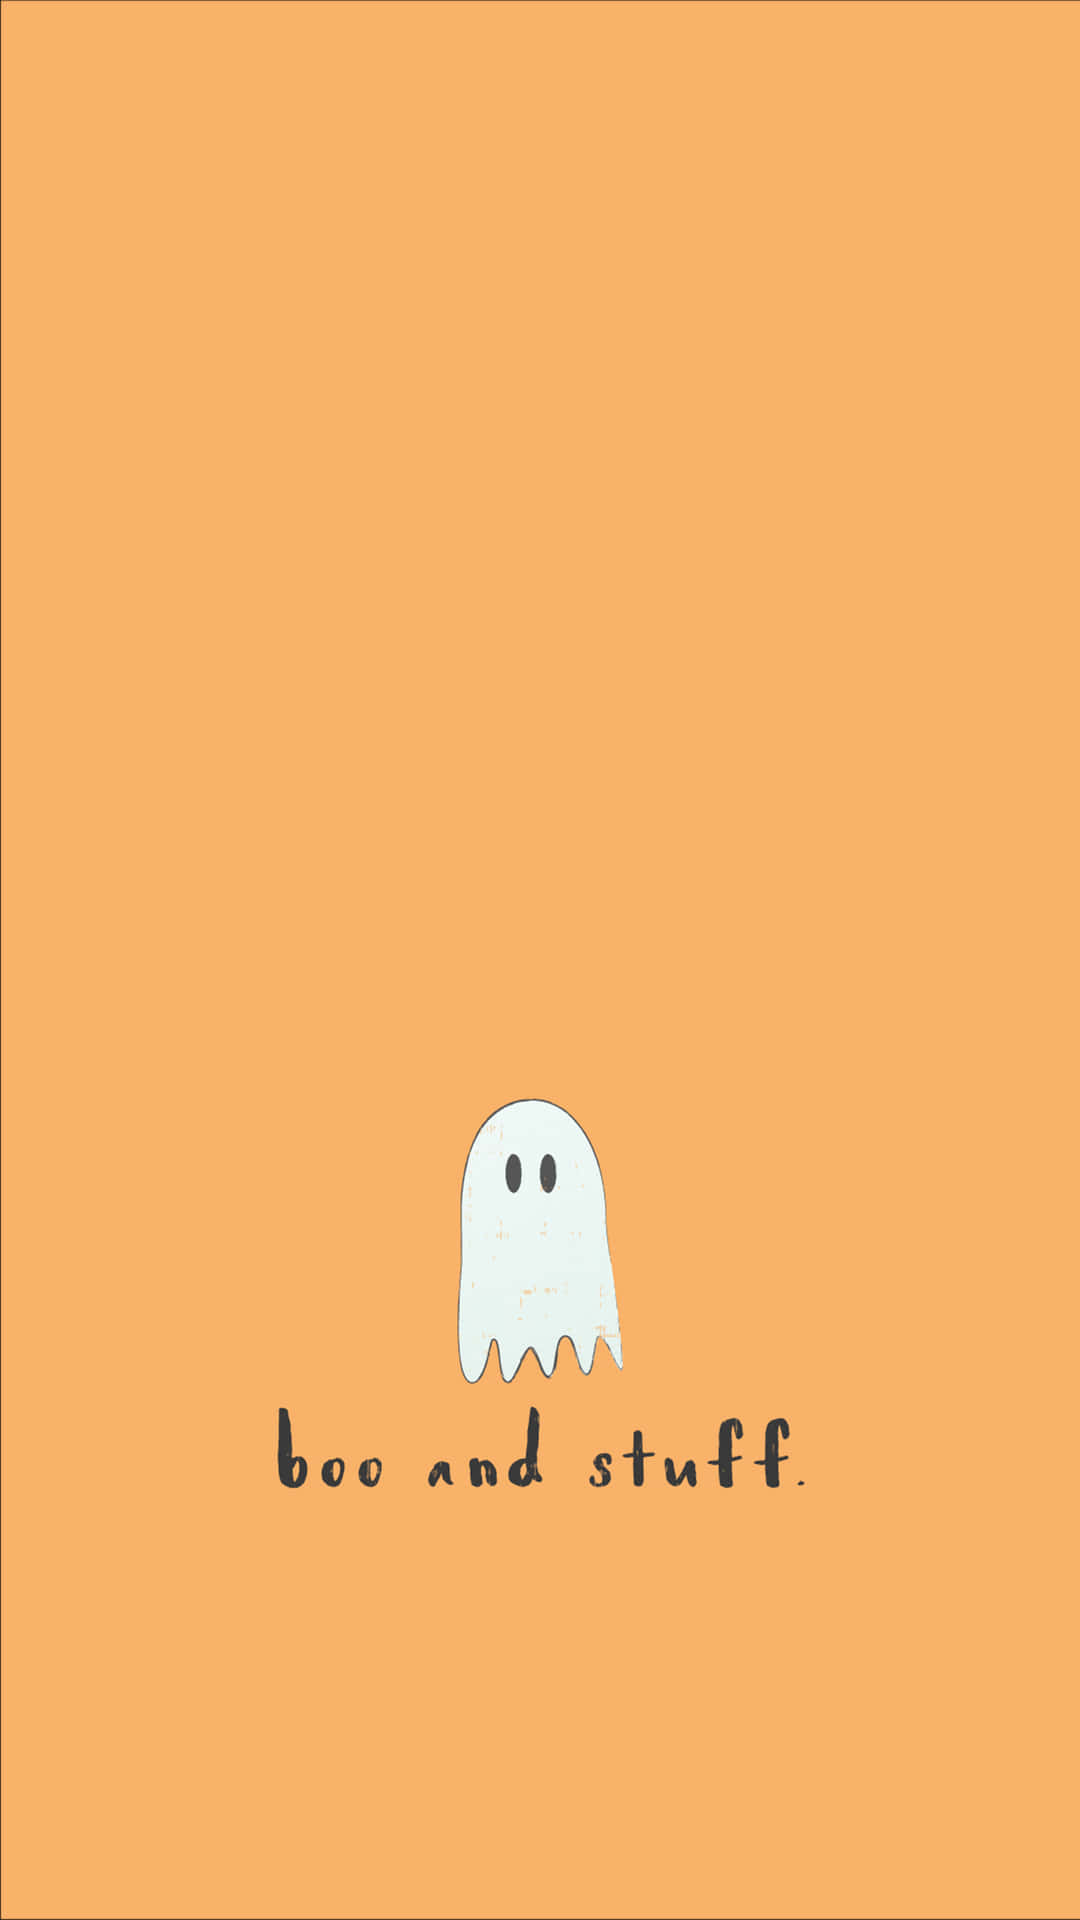 Celebrate this Halloween with a cute iPhone background